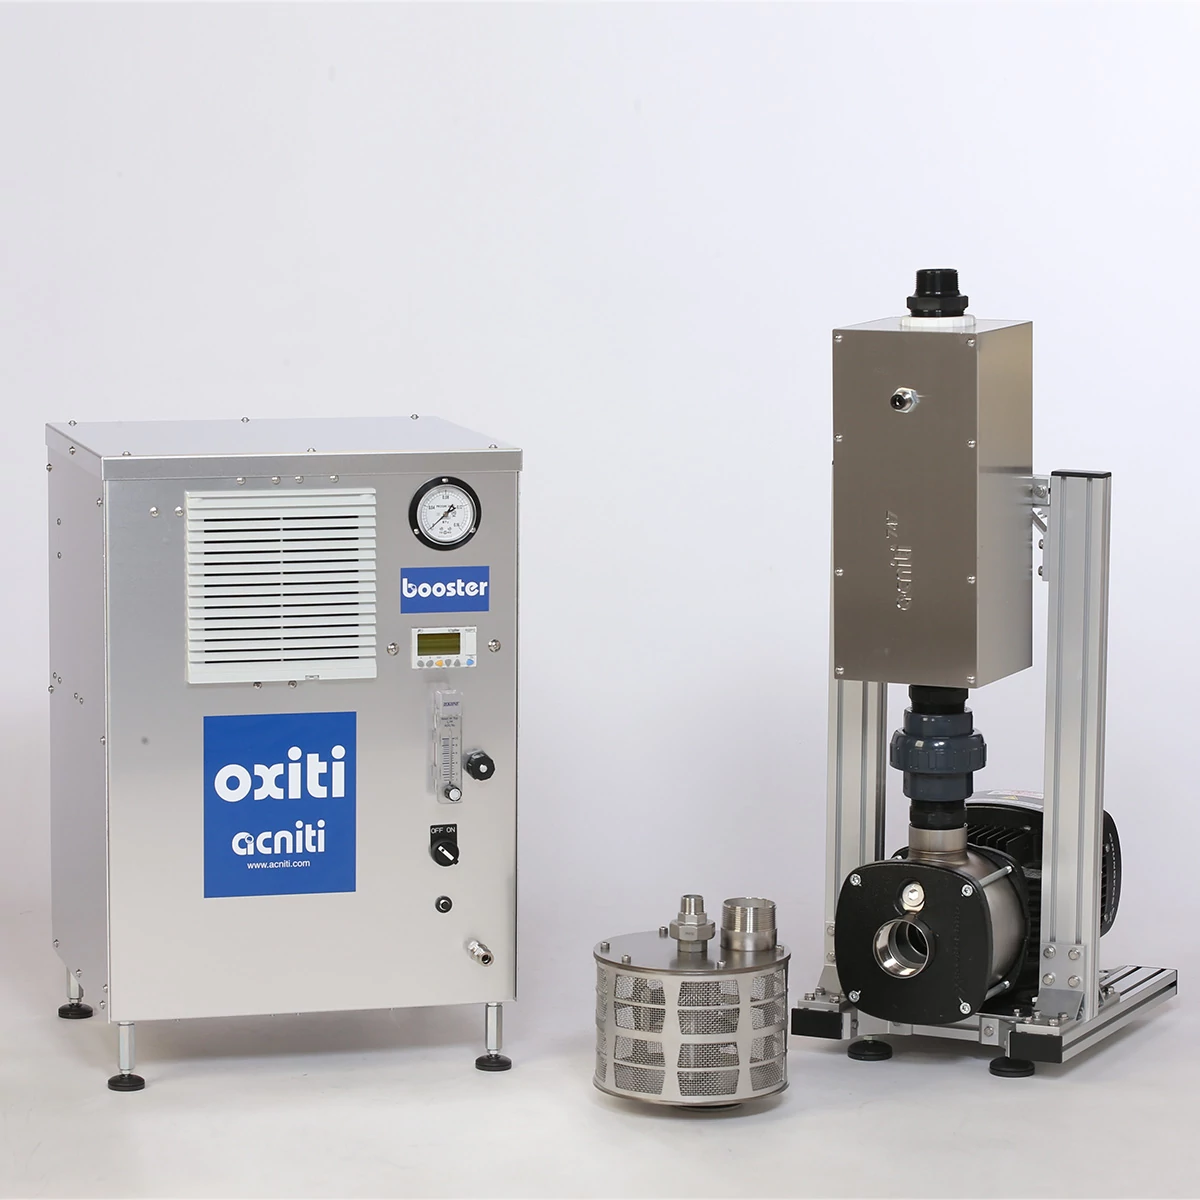 acniti turbiti nanobubbles 747 pump skid set with oxygen concentrator and self cleaning inlet filter